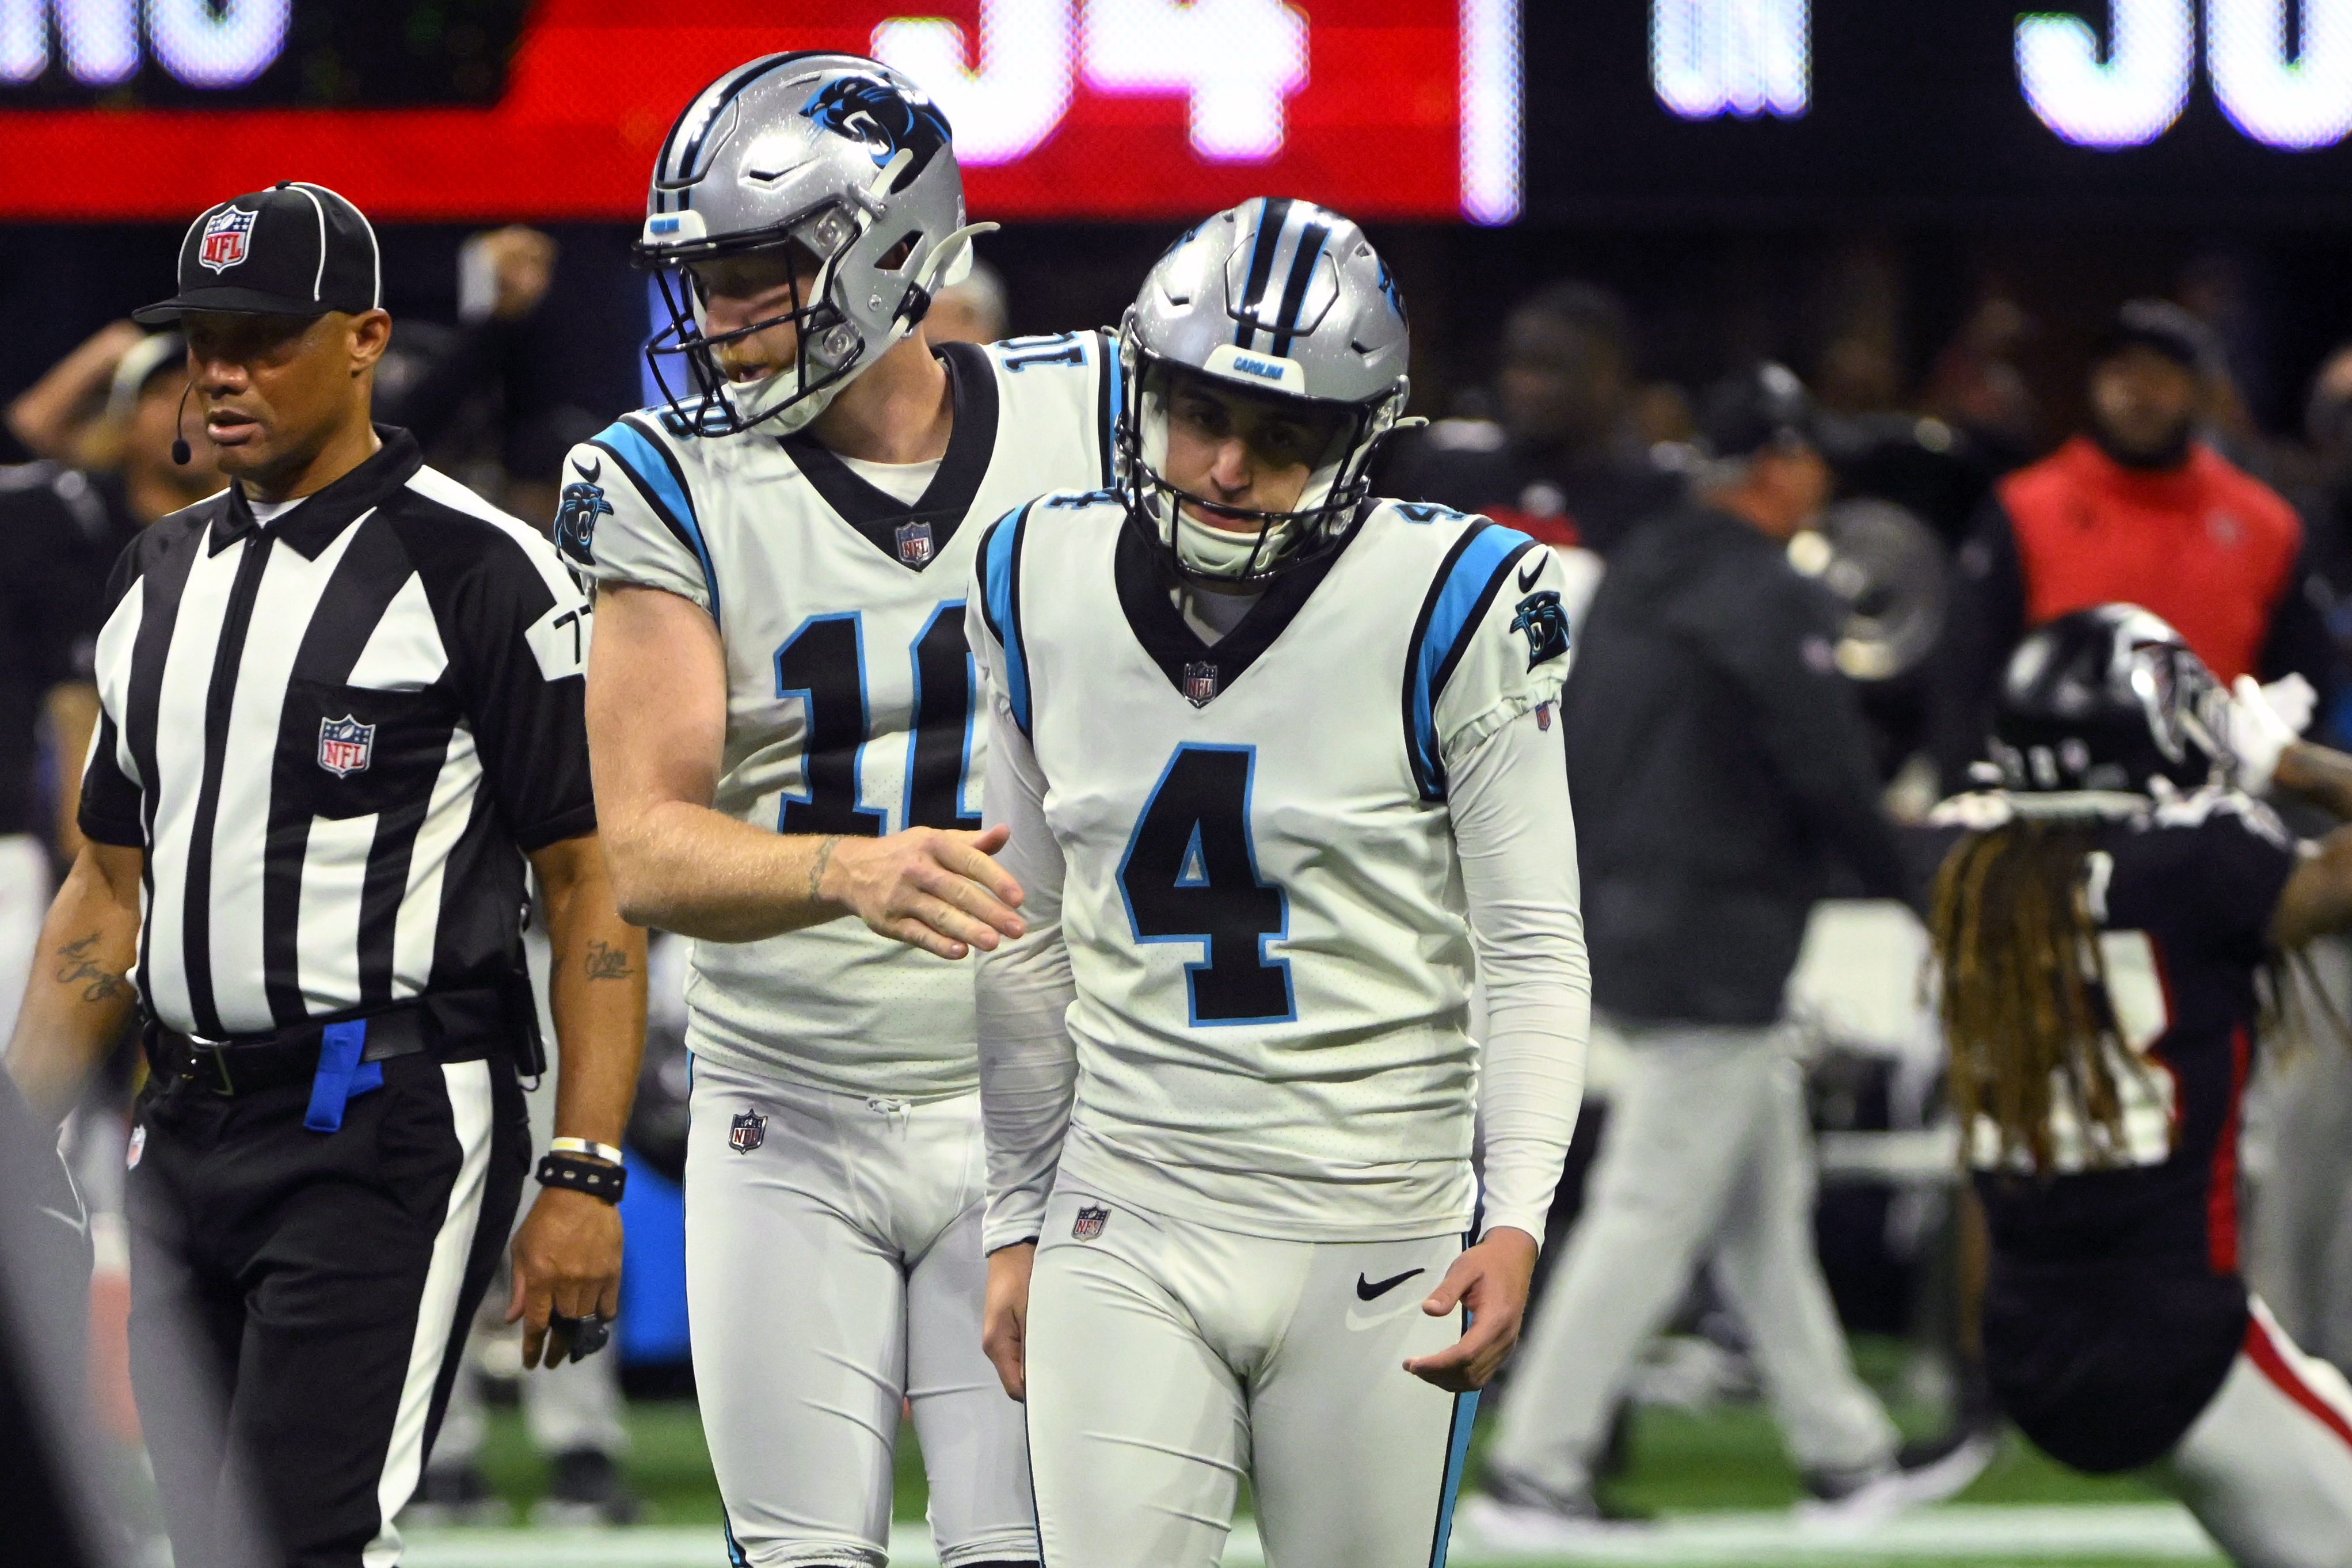 Kicker woes: Panthers miss game-winning extra point, field goal